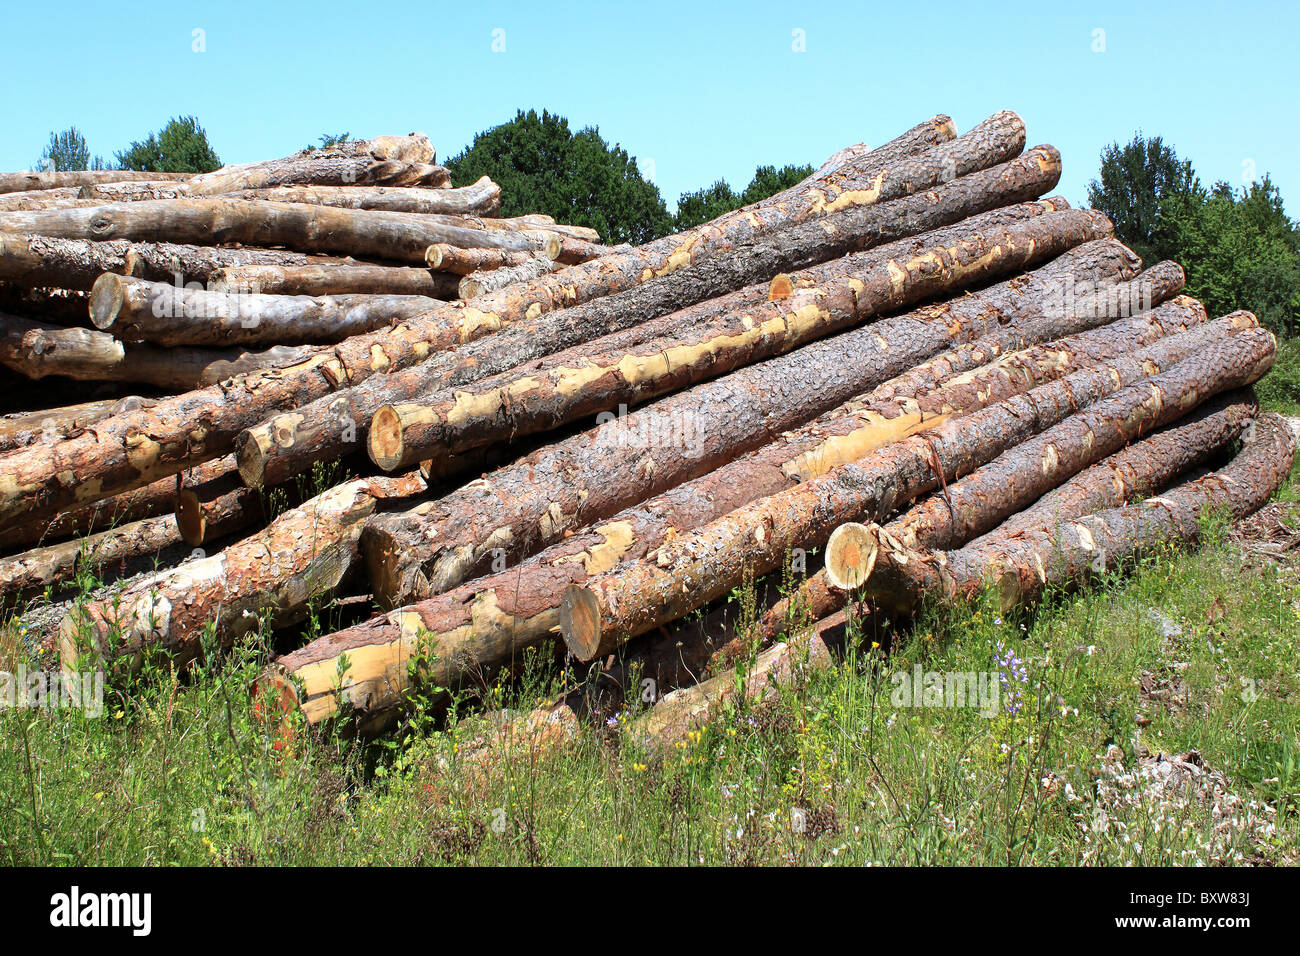 trunks of fir trees lengthened on the earth Stock Photo